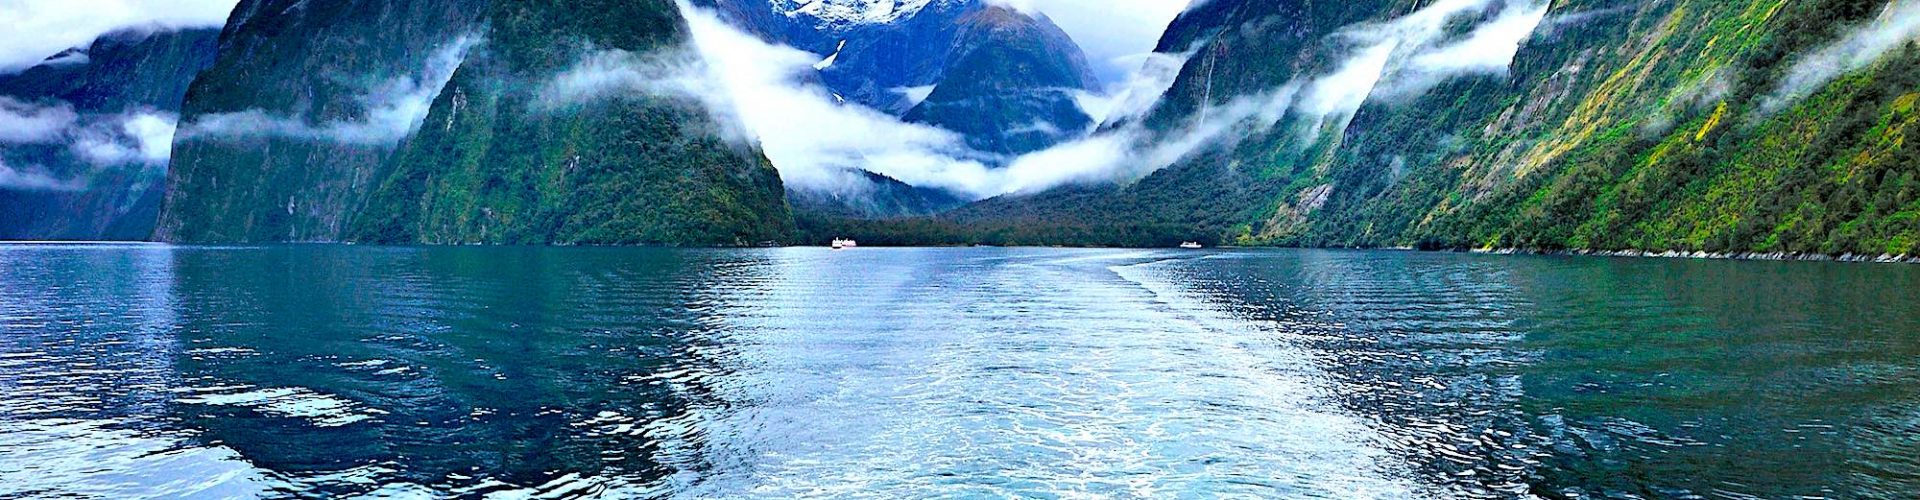 Review: Milford Sound Cruise with Cruise Milford, NZ inner banner